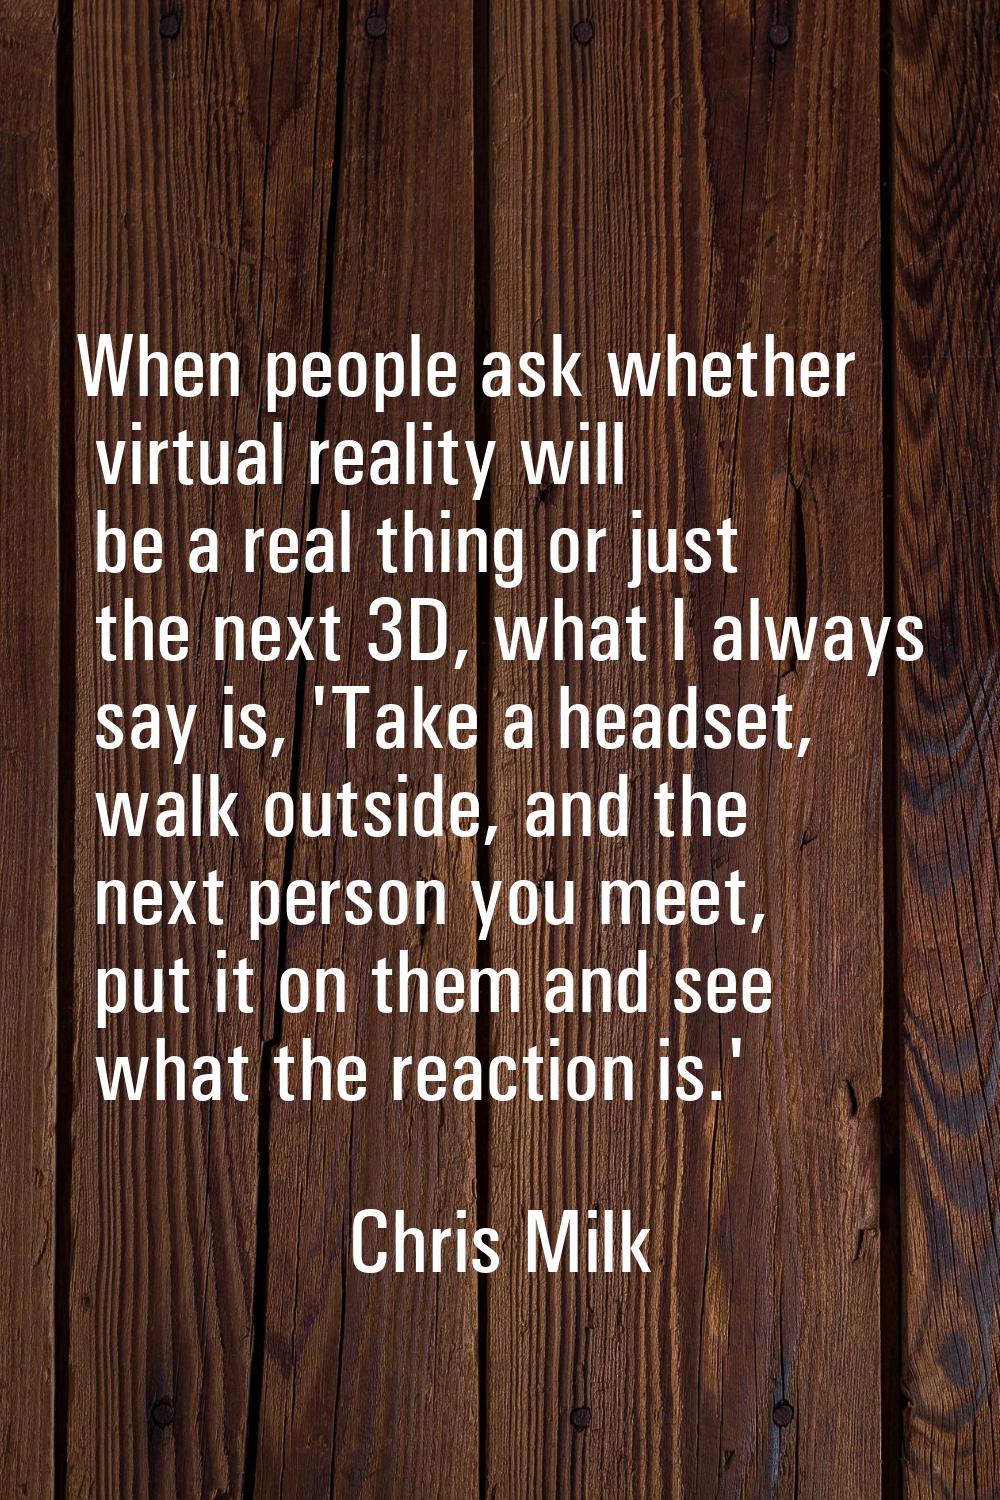 When people ask whether virtual reality will be a real thing or just the next 3D, what I always say